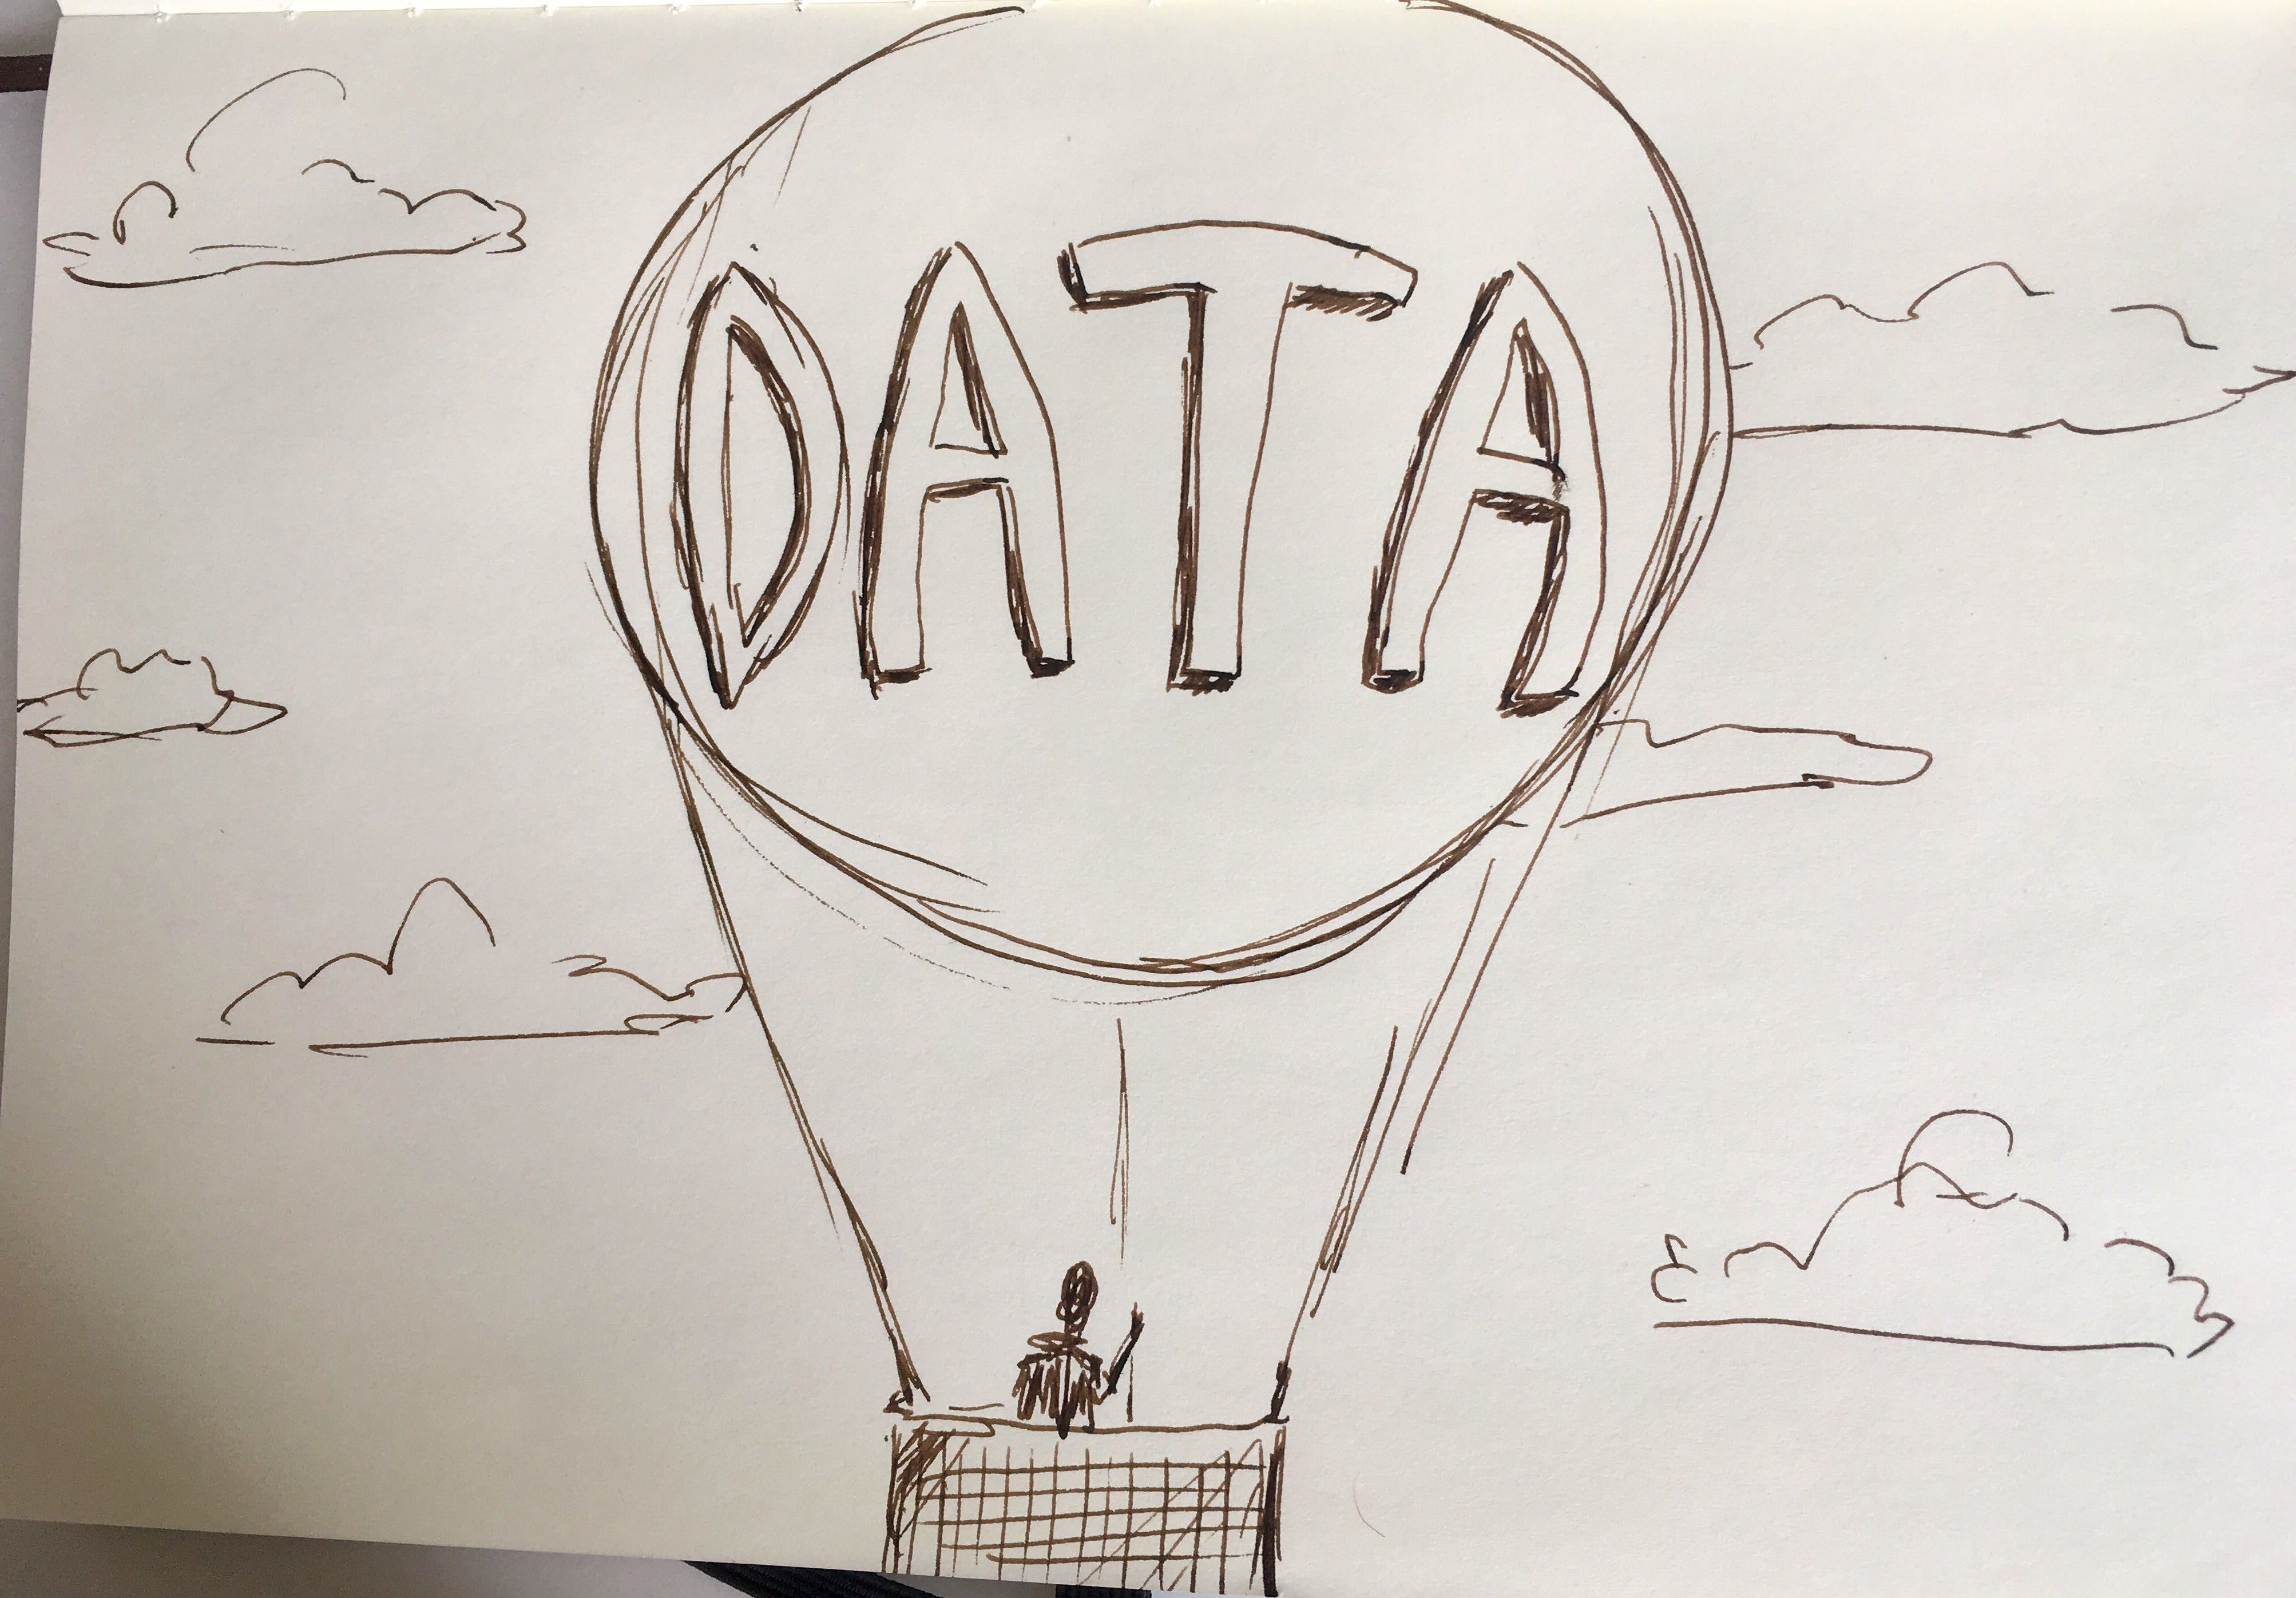 Drawing of data used in a just world